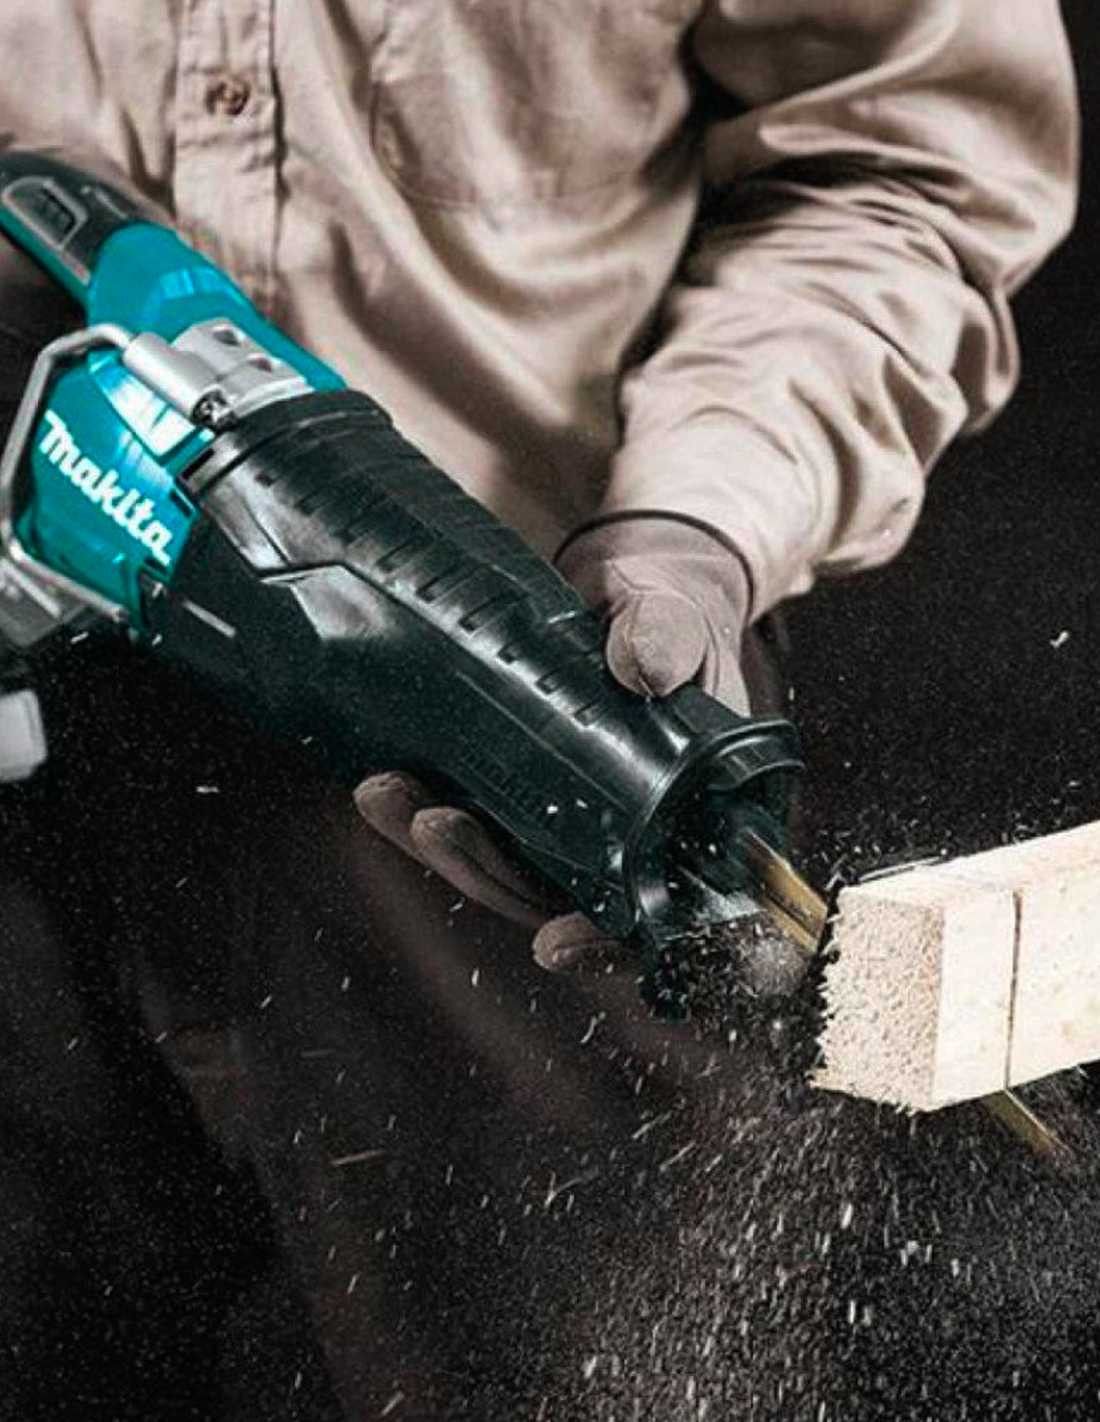 Makita kit with 10 tools + 3 bat + charger + 2 bags DLX1043BL3